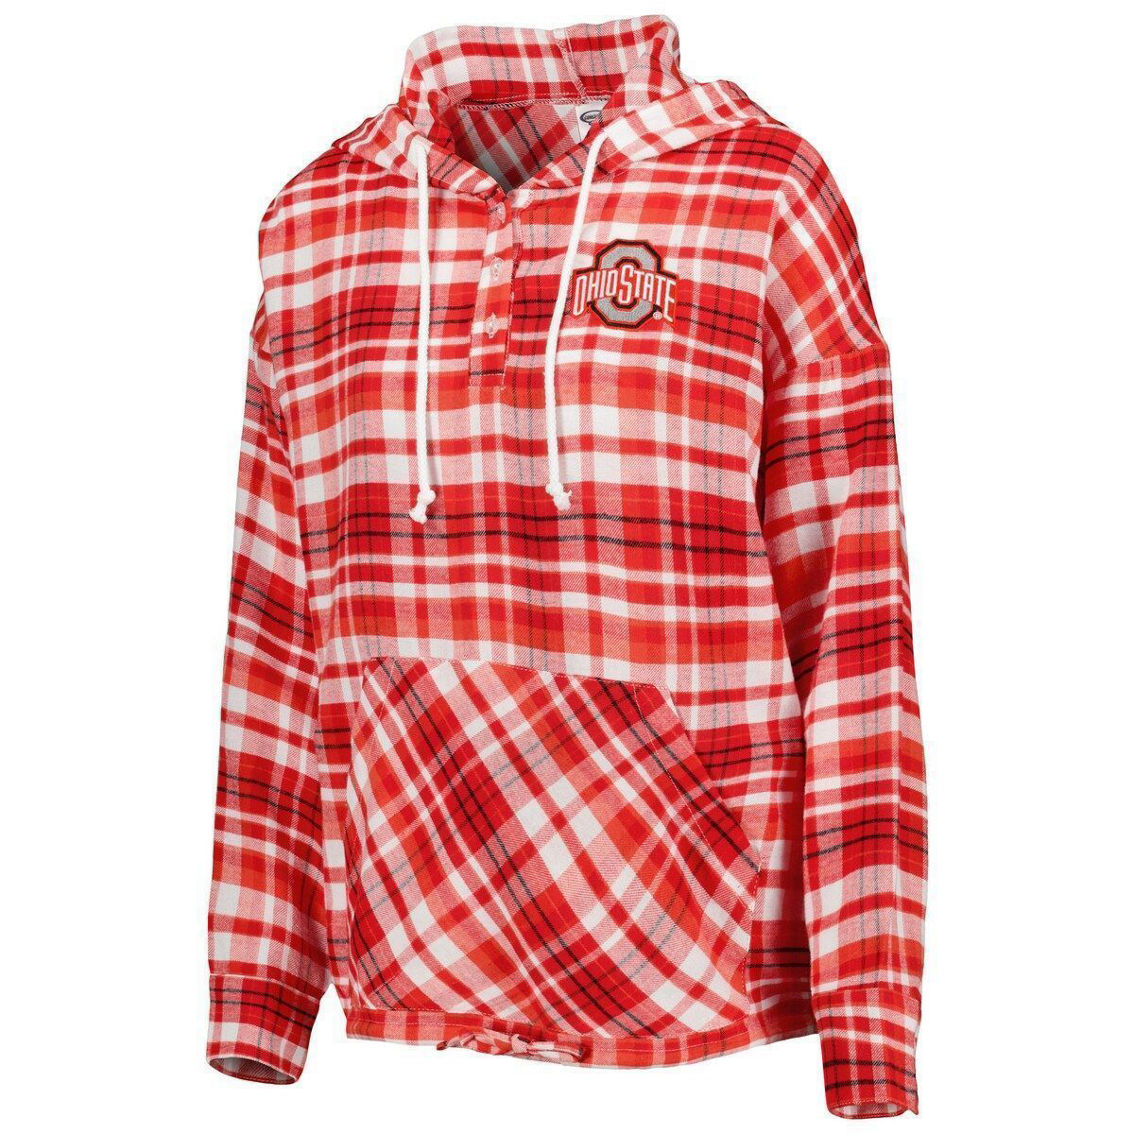 Women's Concepts Sport Scarlet Ohio State Buckeyes Mainstay Plaid Pullover Hoodie - Image 3 of 4